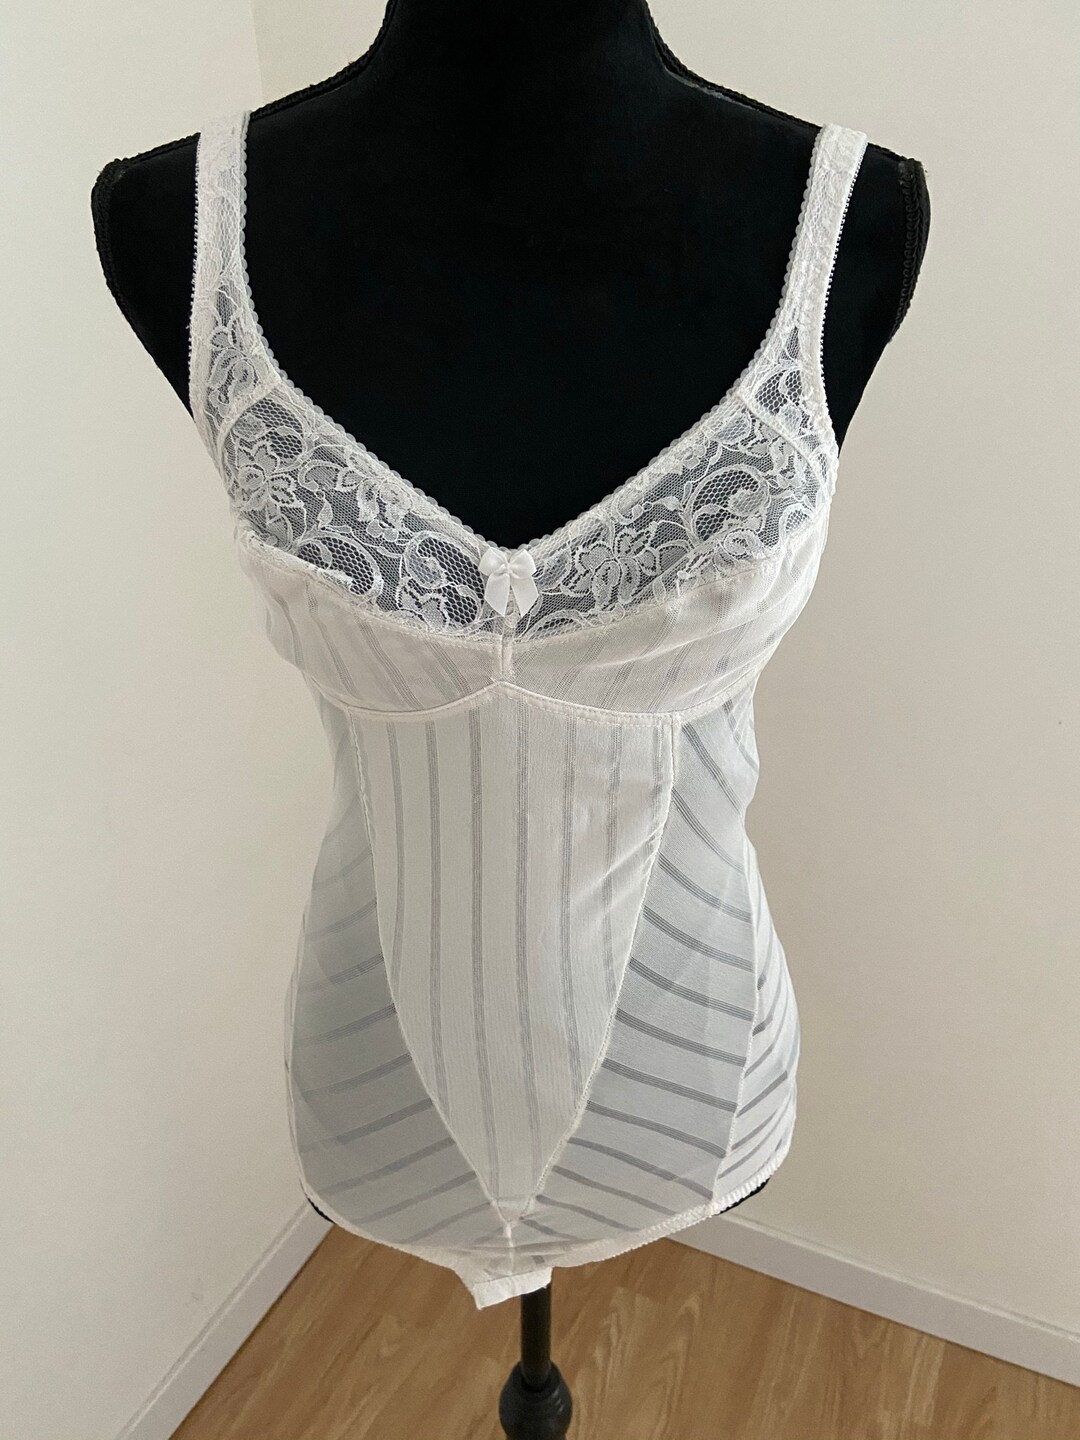 Vintage French 'DAMART' White Lace Trimmed Body Shaper / One Piece Shapewear  S/M 34C 